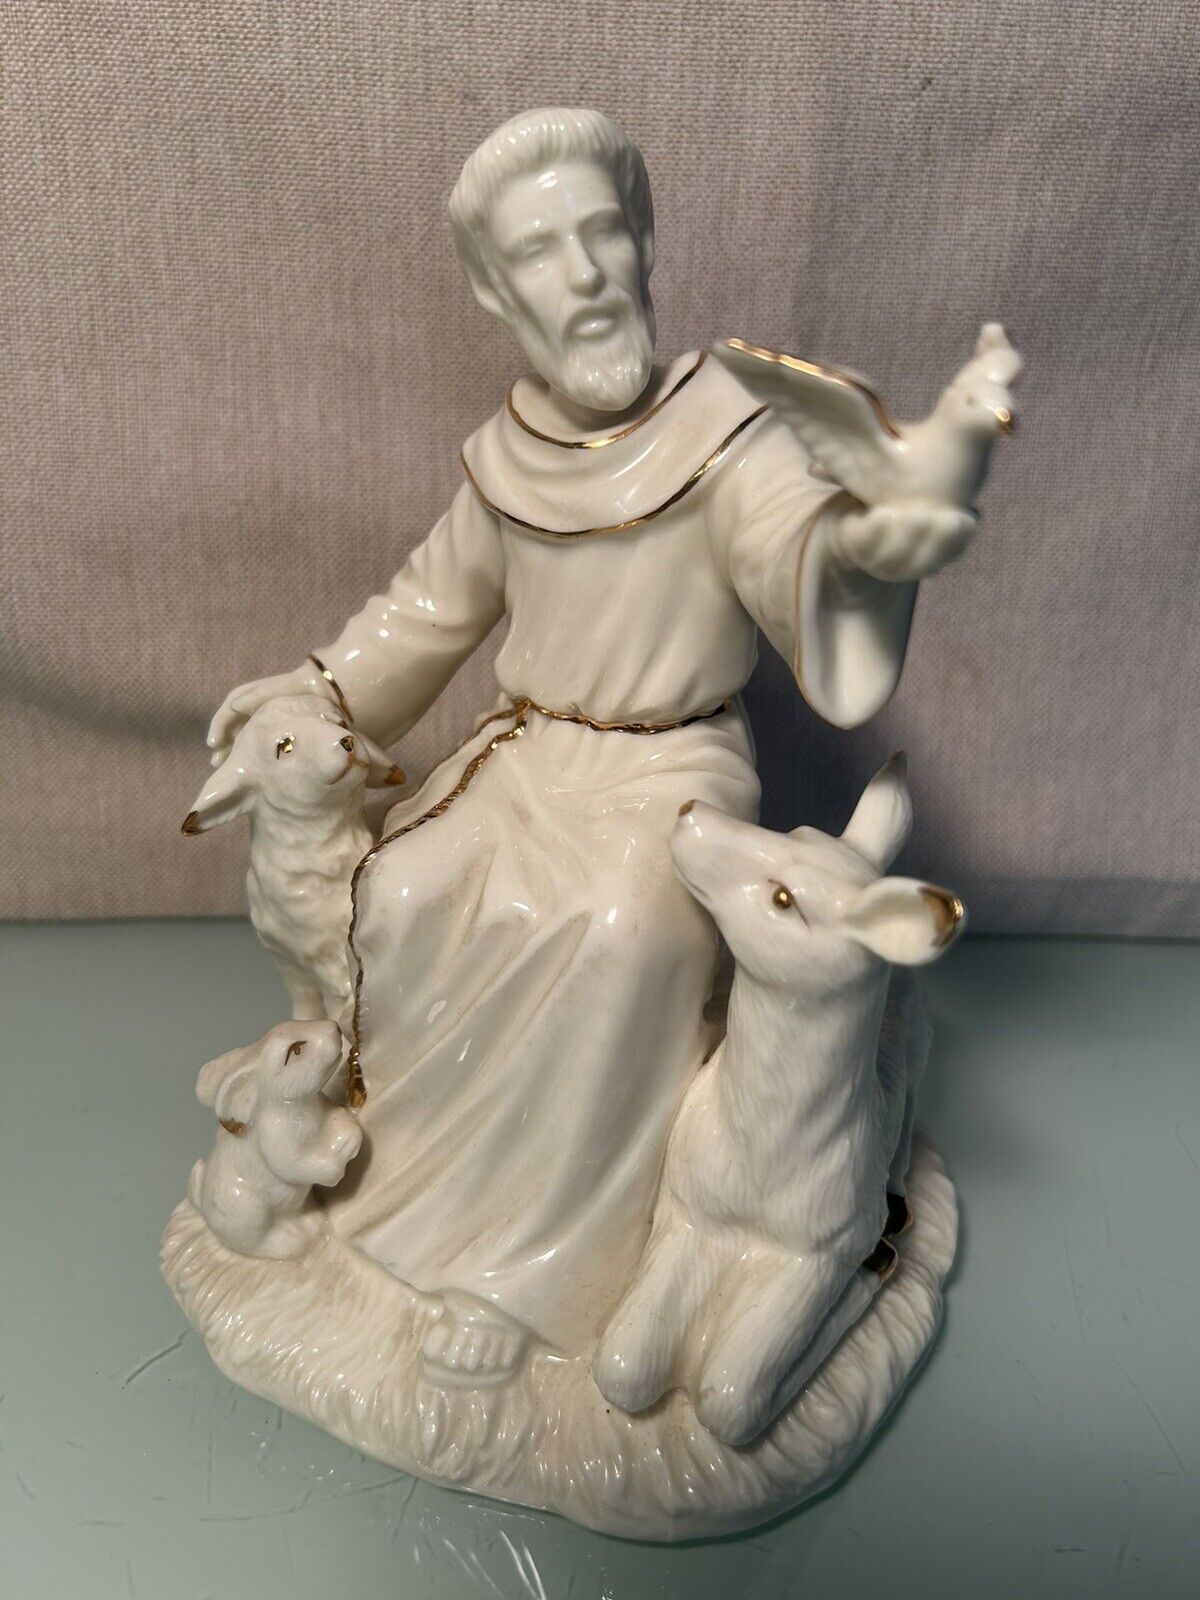 Vintage 1998 Lefton Porcelain St Francis of Assisi Music Box With Gold Trimming